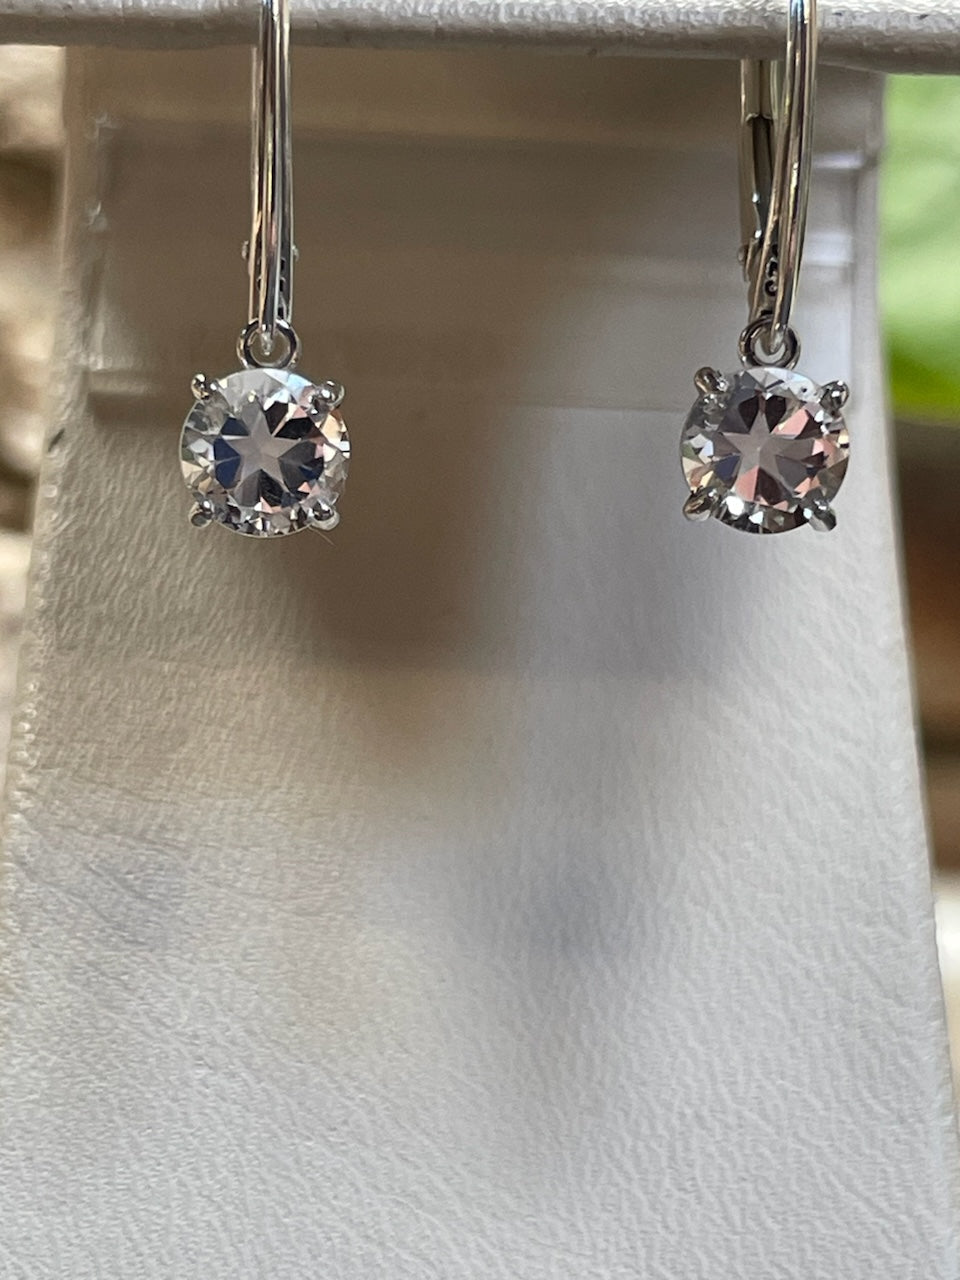 1.90cttw Mason County Clear Topaz Lone Brilliant Star Cut Mounted in a Sterling Silver dangle leverback earrings.